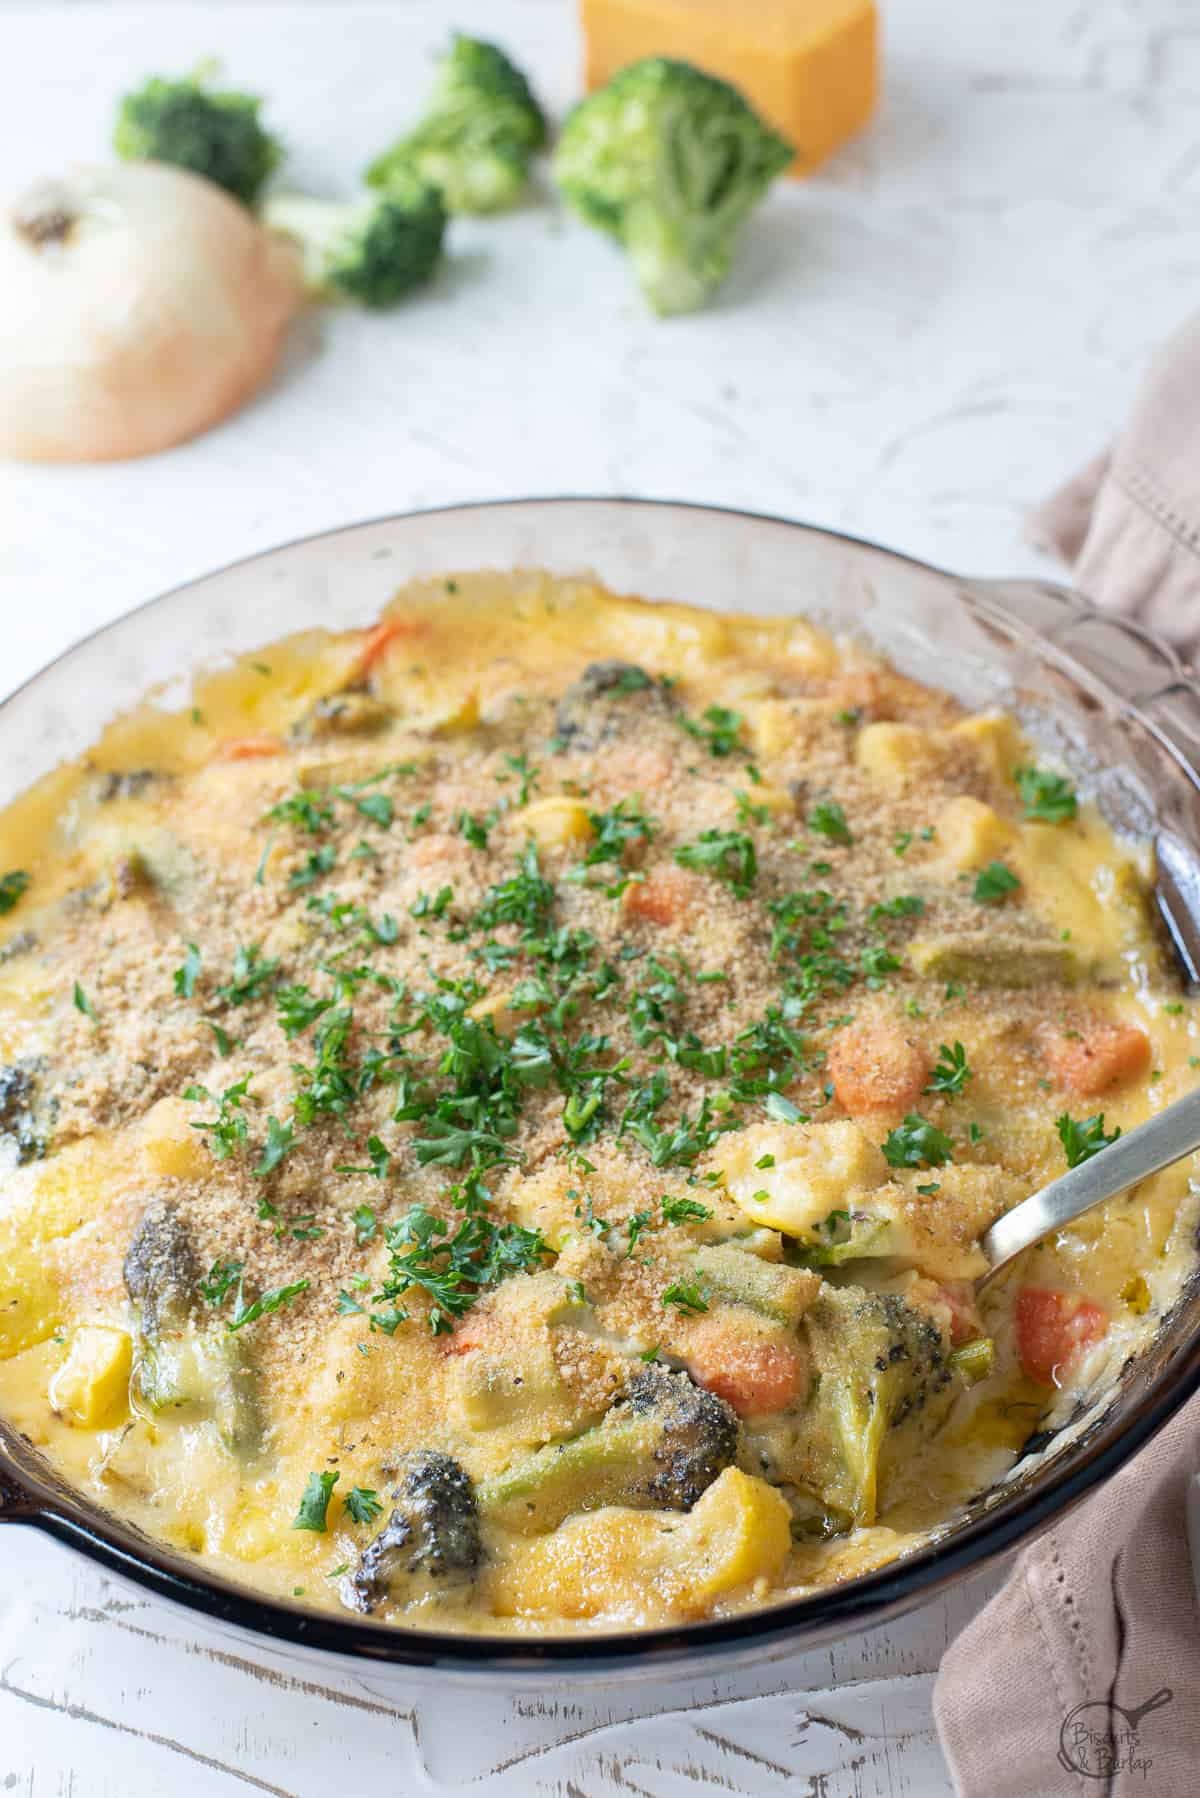 au gratin vegetables with spoon.